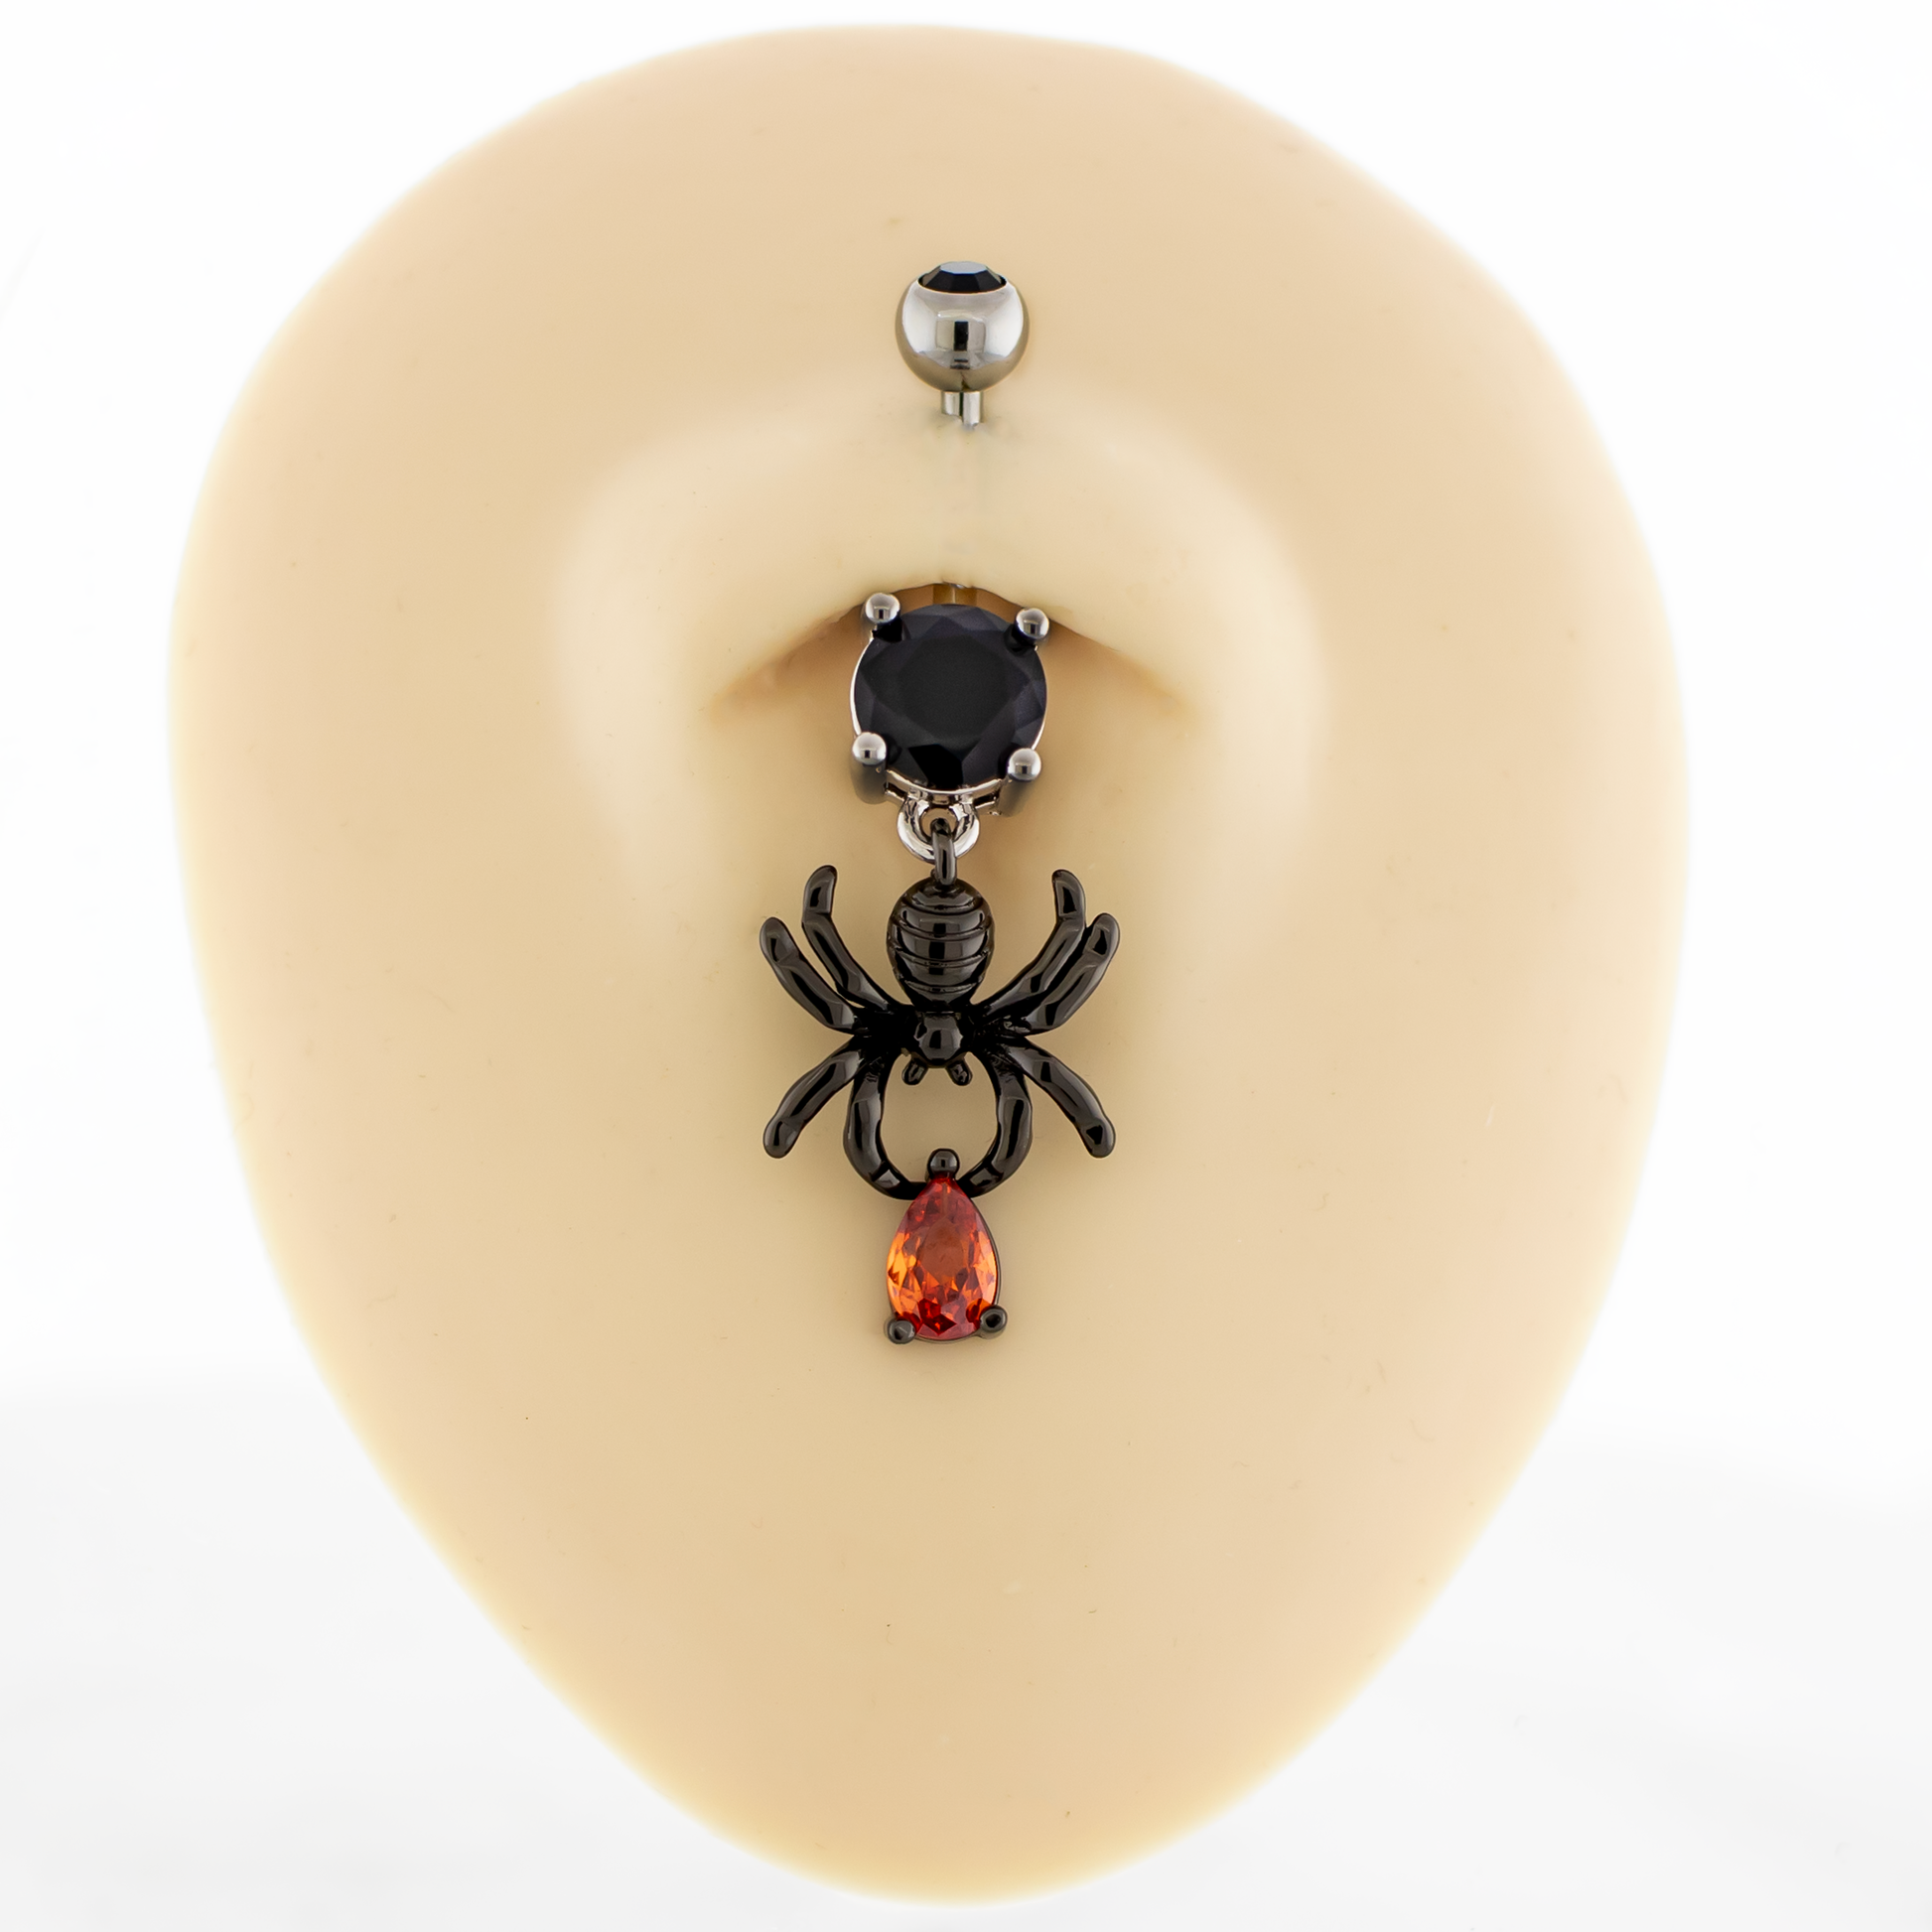 14G Spider with Red Gem Navel Ring - Pierced Addiction